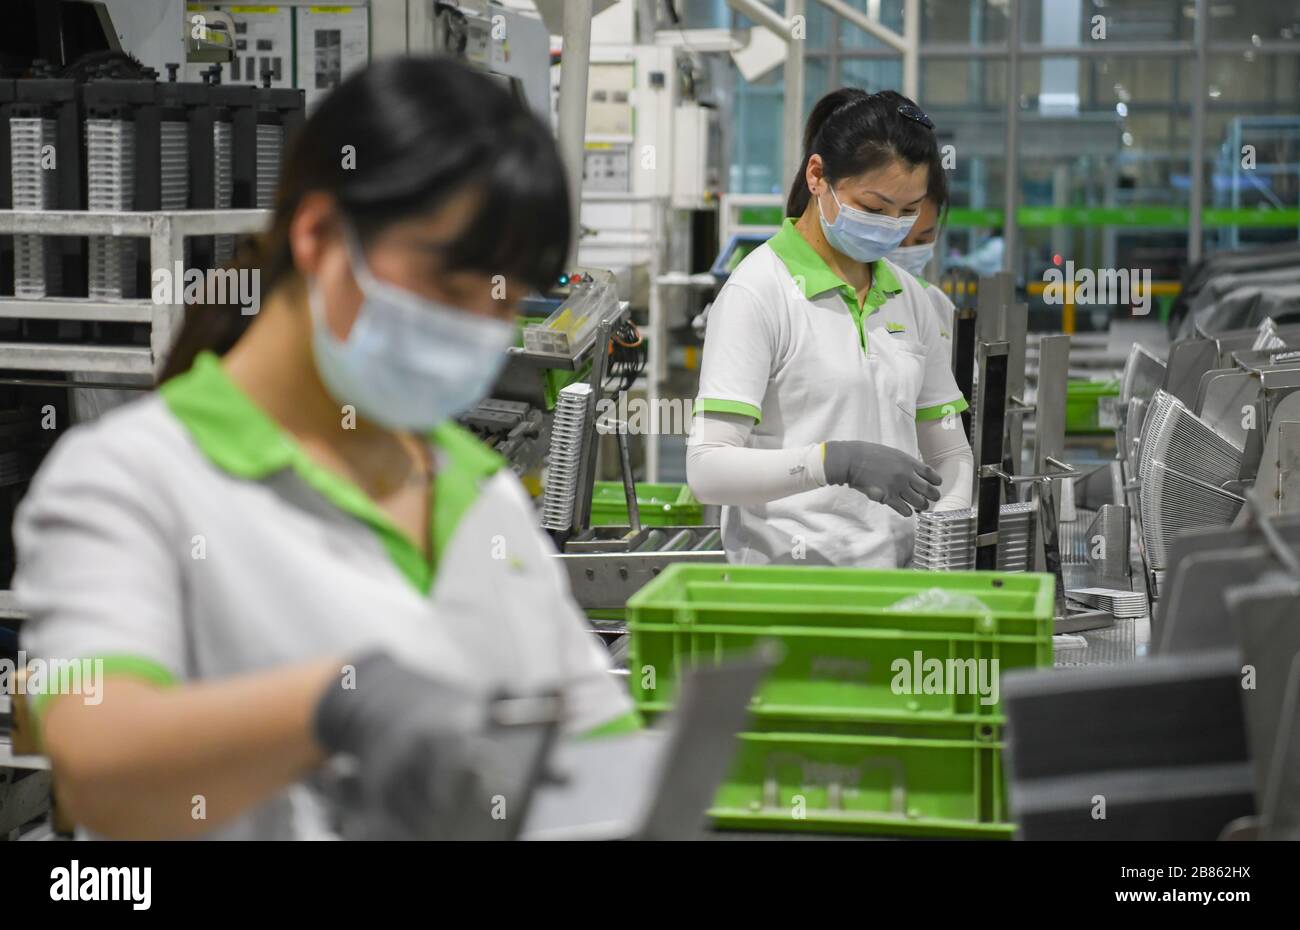 Wuhan, China's Hubei Province. 19th Mar, 2020. Staff members work on a production line at a company in Jingzhou, central China's Hubei Province, March 19, 2020. The Valeo Hubei company has resumed production since late February. Over 90% capacity of the company has recovered and over 80% staff members have returned to their work. Credit: Cheng Min/Xinhua/Alamy Live News Stock Photo